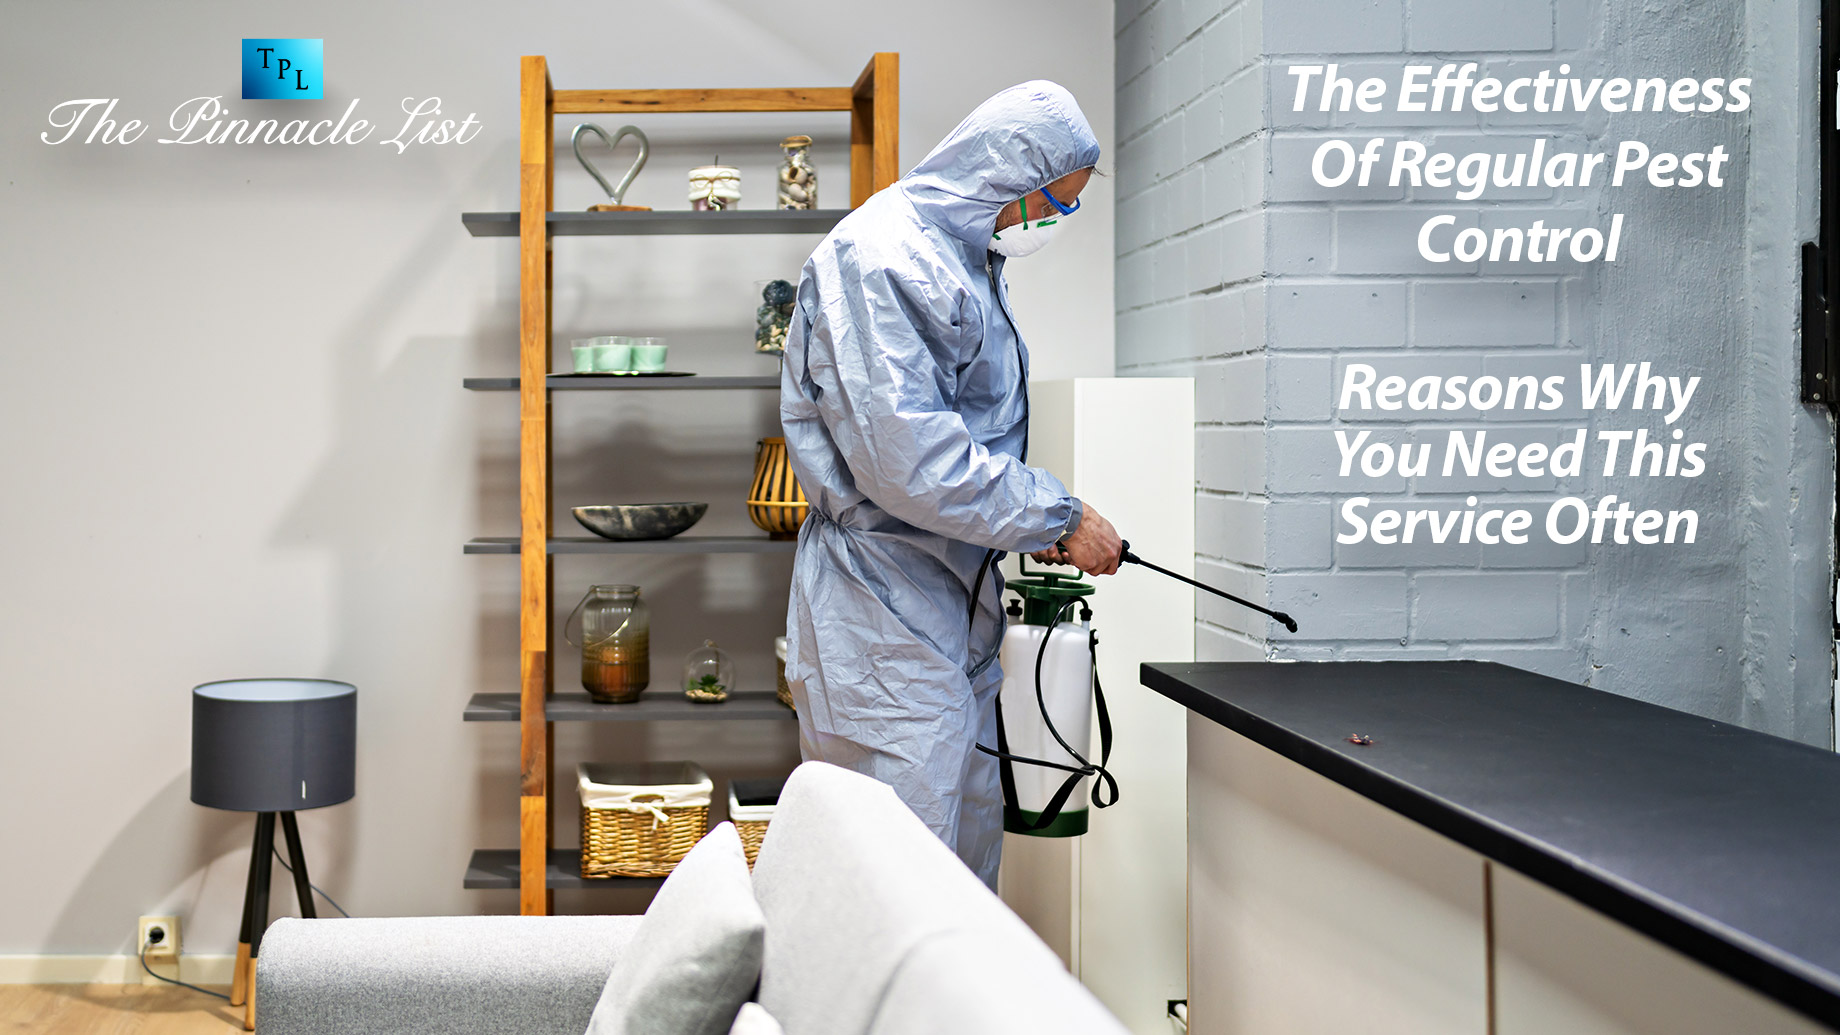 The Effectiveness Of Regular Pest Control: Reasons Why You Need This Service Often